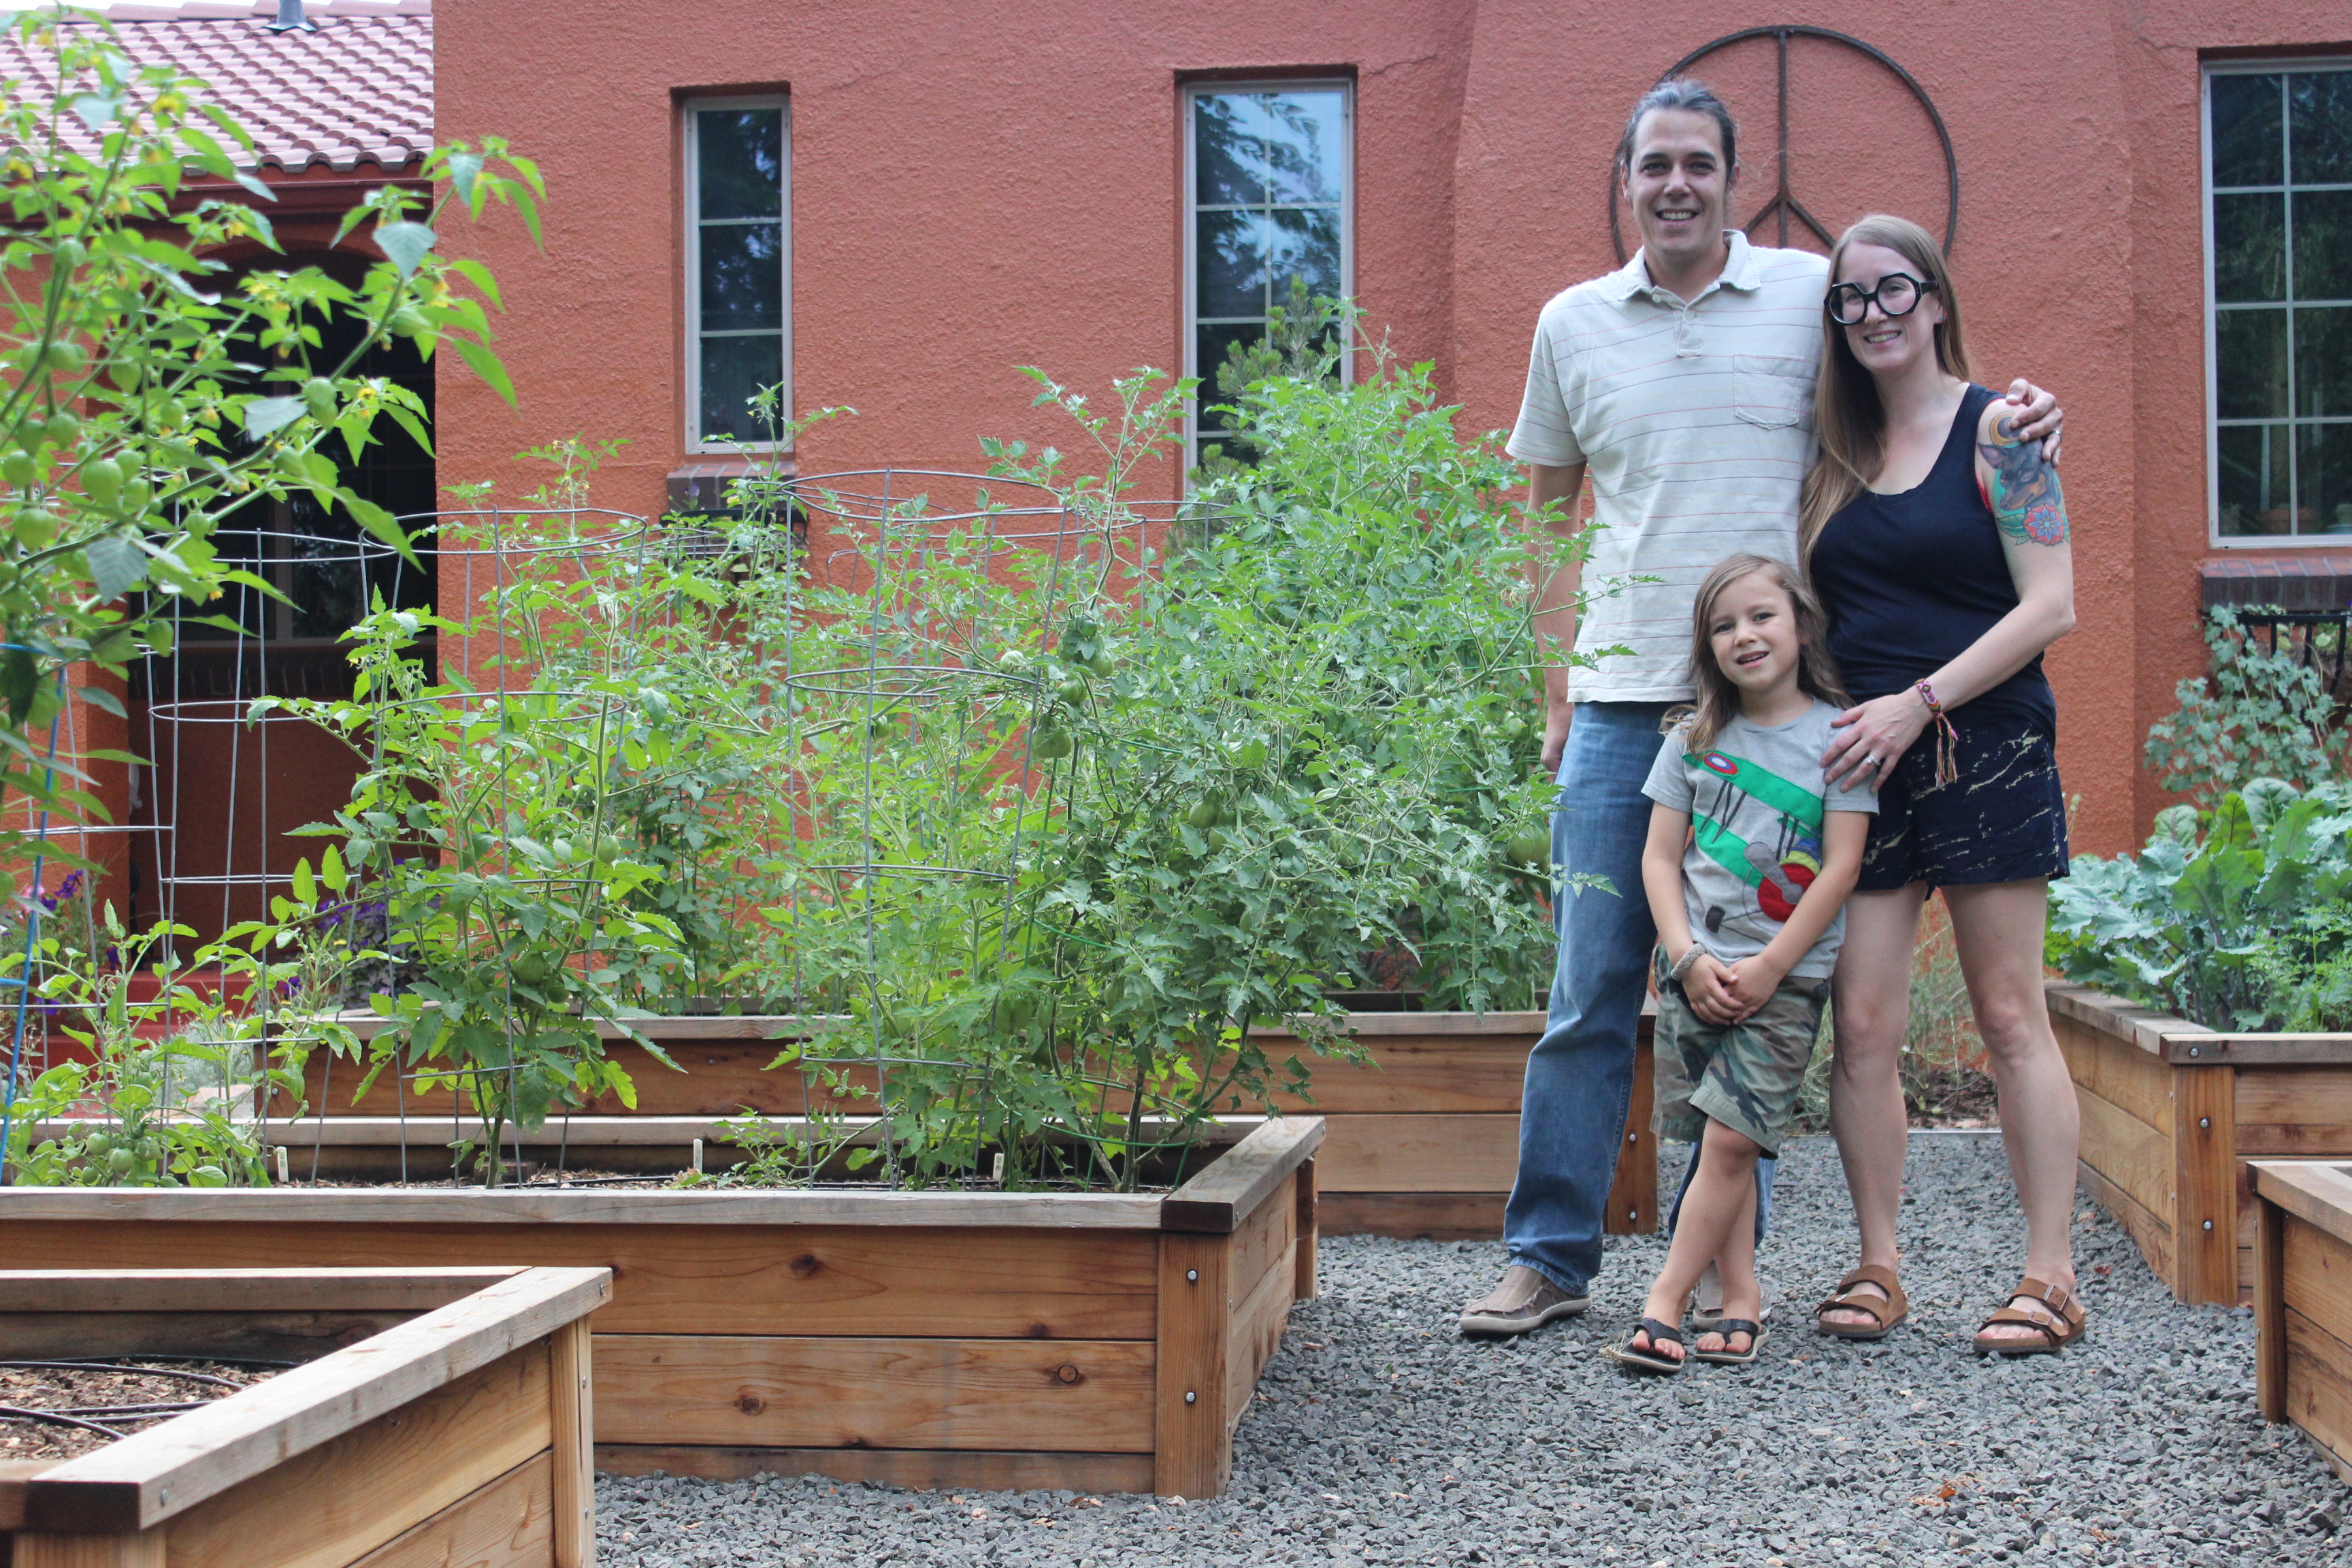 Ben Dinsmore and his wife, Tracy, and son, Soren, ditched their front lawn in favor of a vegetable garden after moving to Park Hill two years ago.